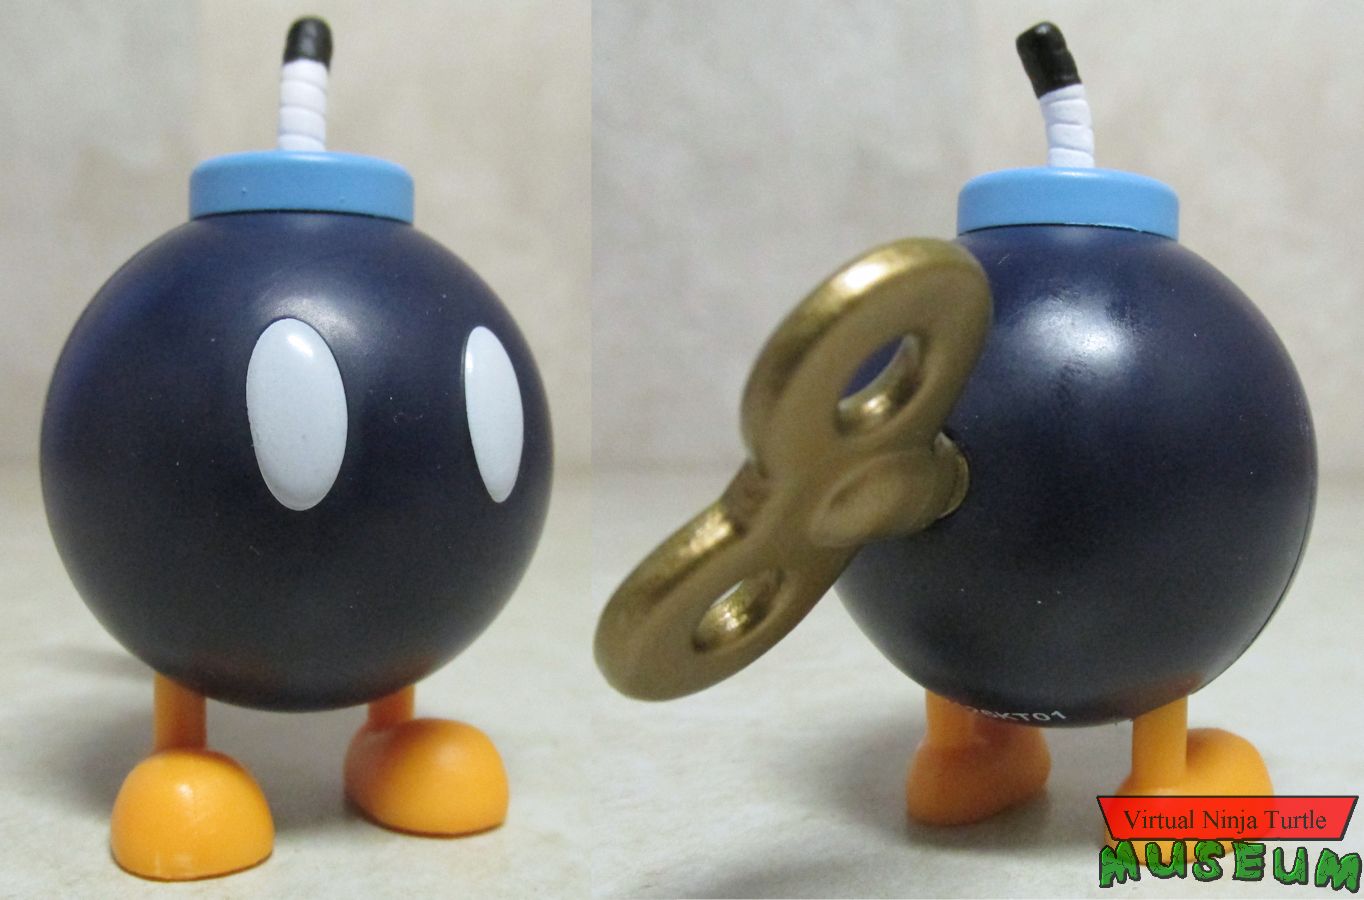 Bob-omb front and back